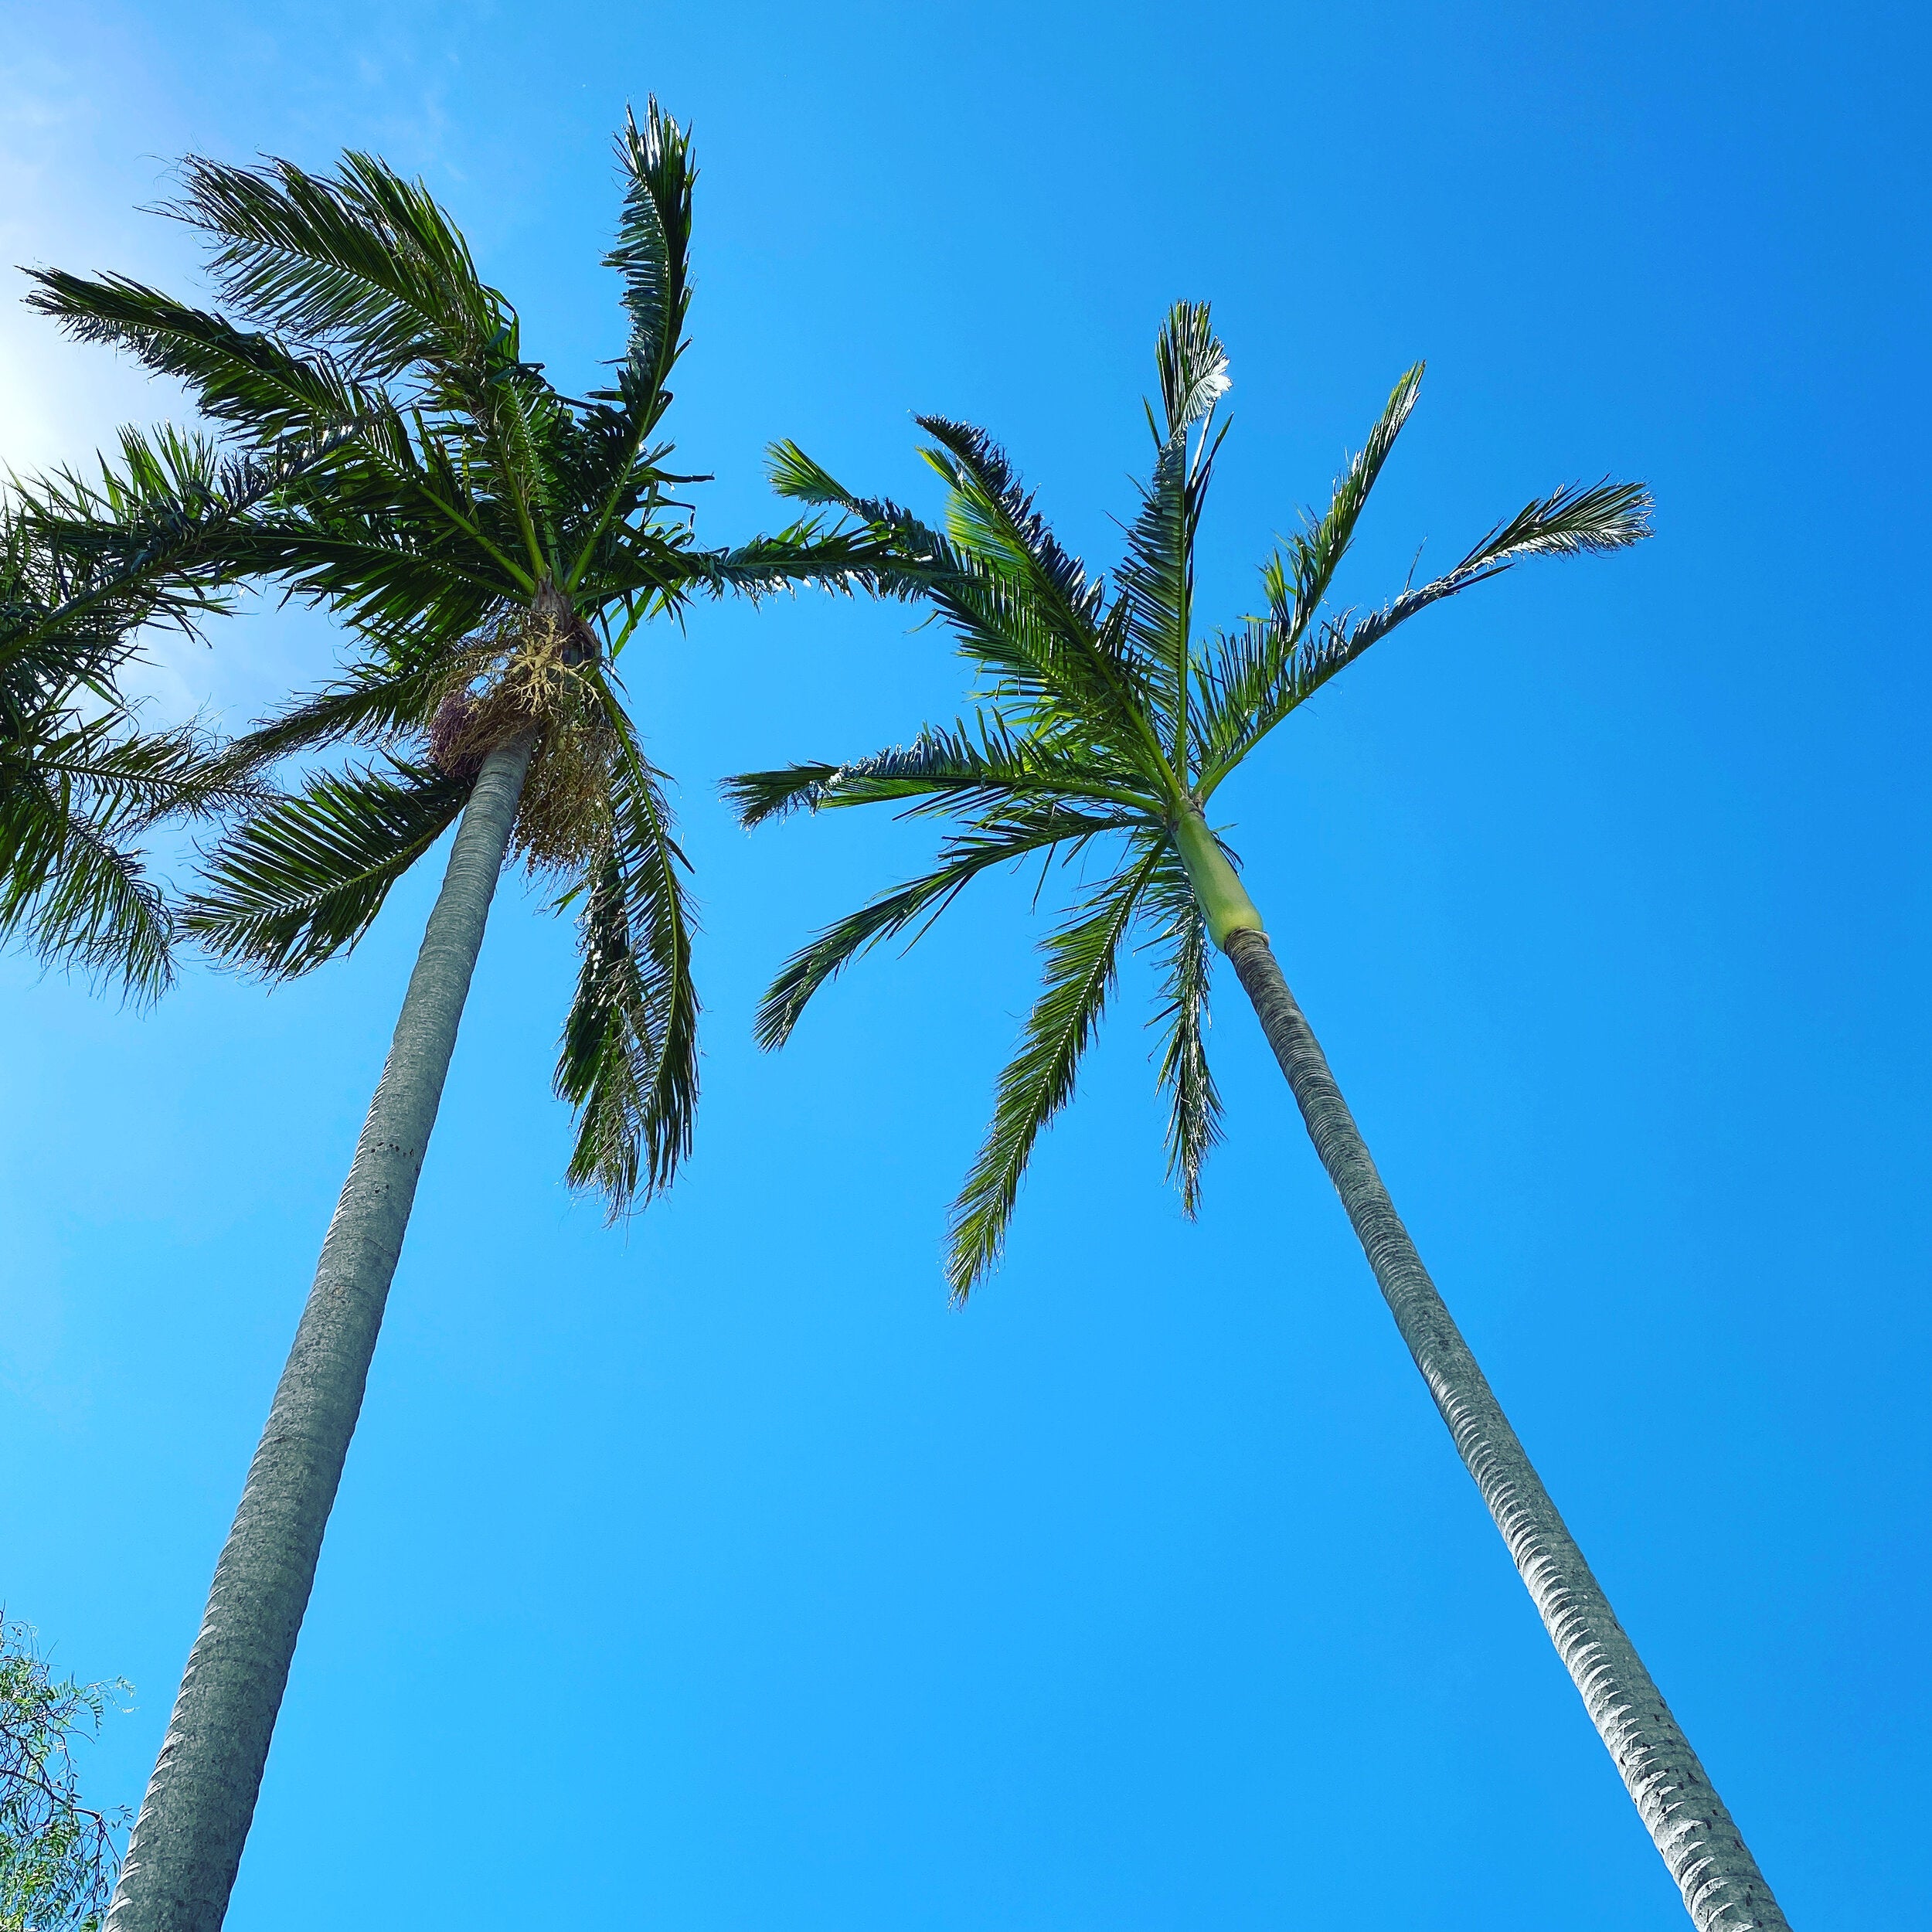 Palm trees and blue skies make a perfect beach holiday